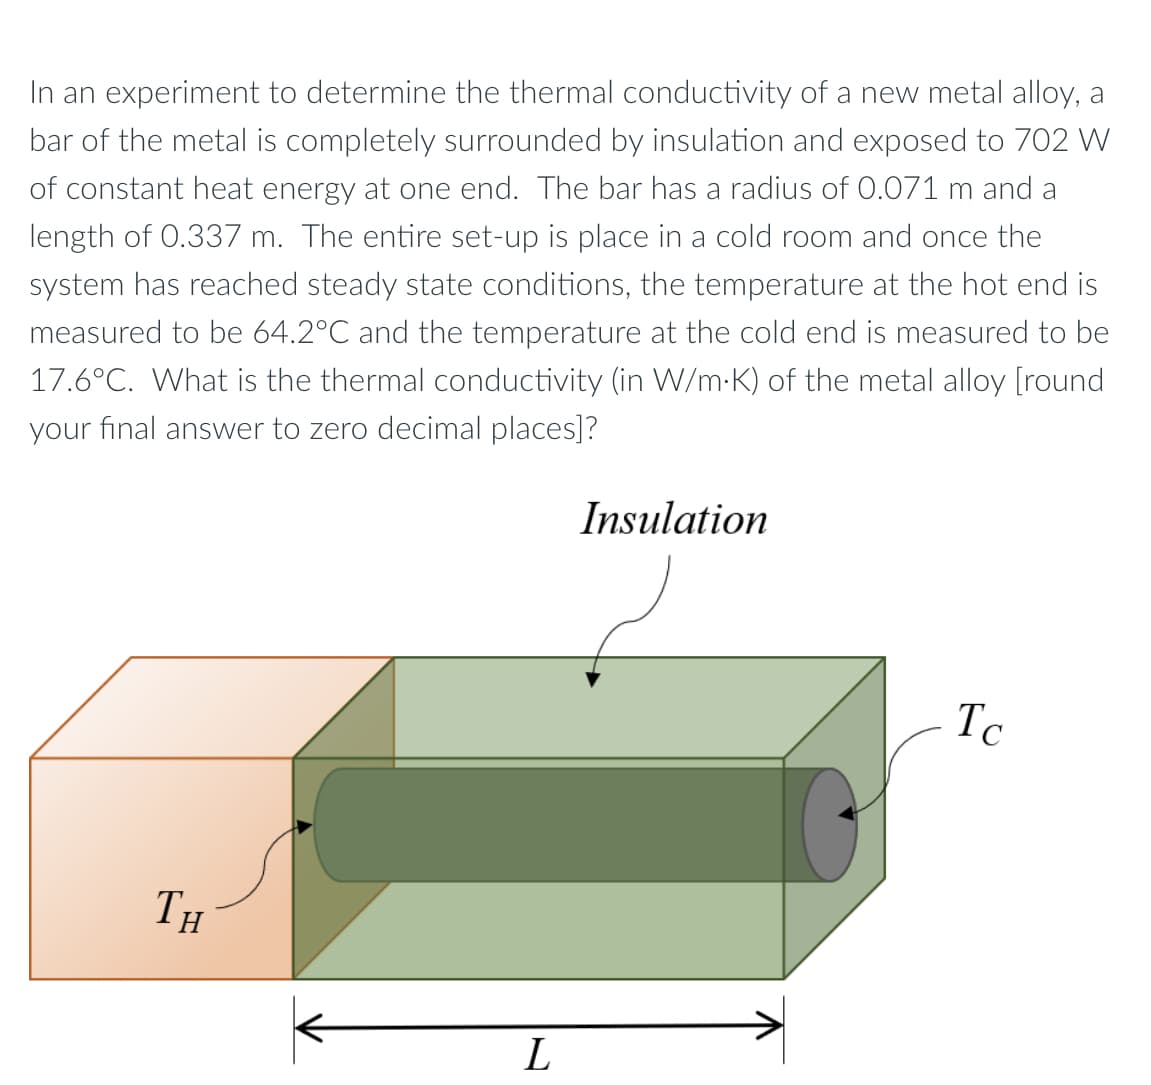 In an experiment to determine the thermal conductivity of a new metal alloy, a
bar of the metal is completely surrounded by insulation and exposed to 702 W
of constant heat energy at one end. The bar has a radius of 0.071 m and a
length of 0.337 m. The entire set-up is place in a cold room and once the
system has reached steady state conditions, the temperature at the hot end is
measured to be 64.2°C and the temperature at the cold end is measured to be
17.6°C. What is the thermal conductivity (in W/m-K) of the metal alloy [round
your final answer to zero decimal places]?
Insulation
Tc
TH
L
